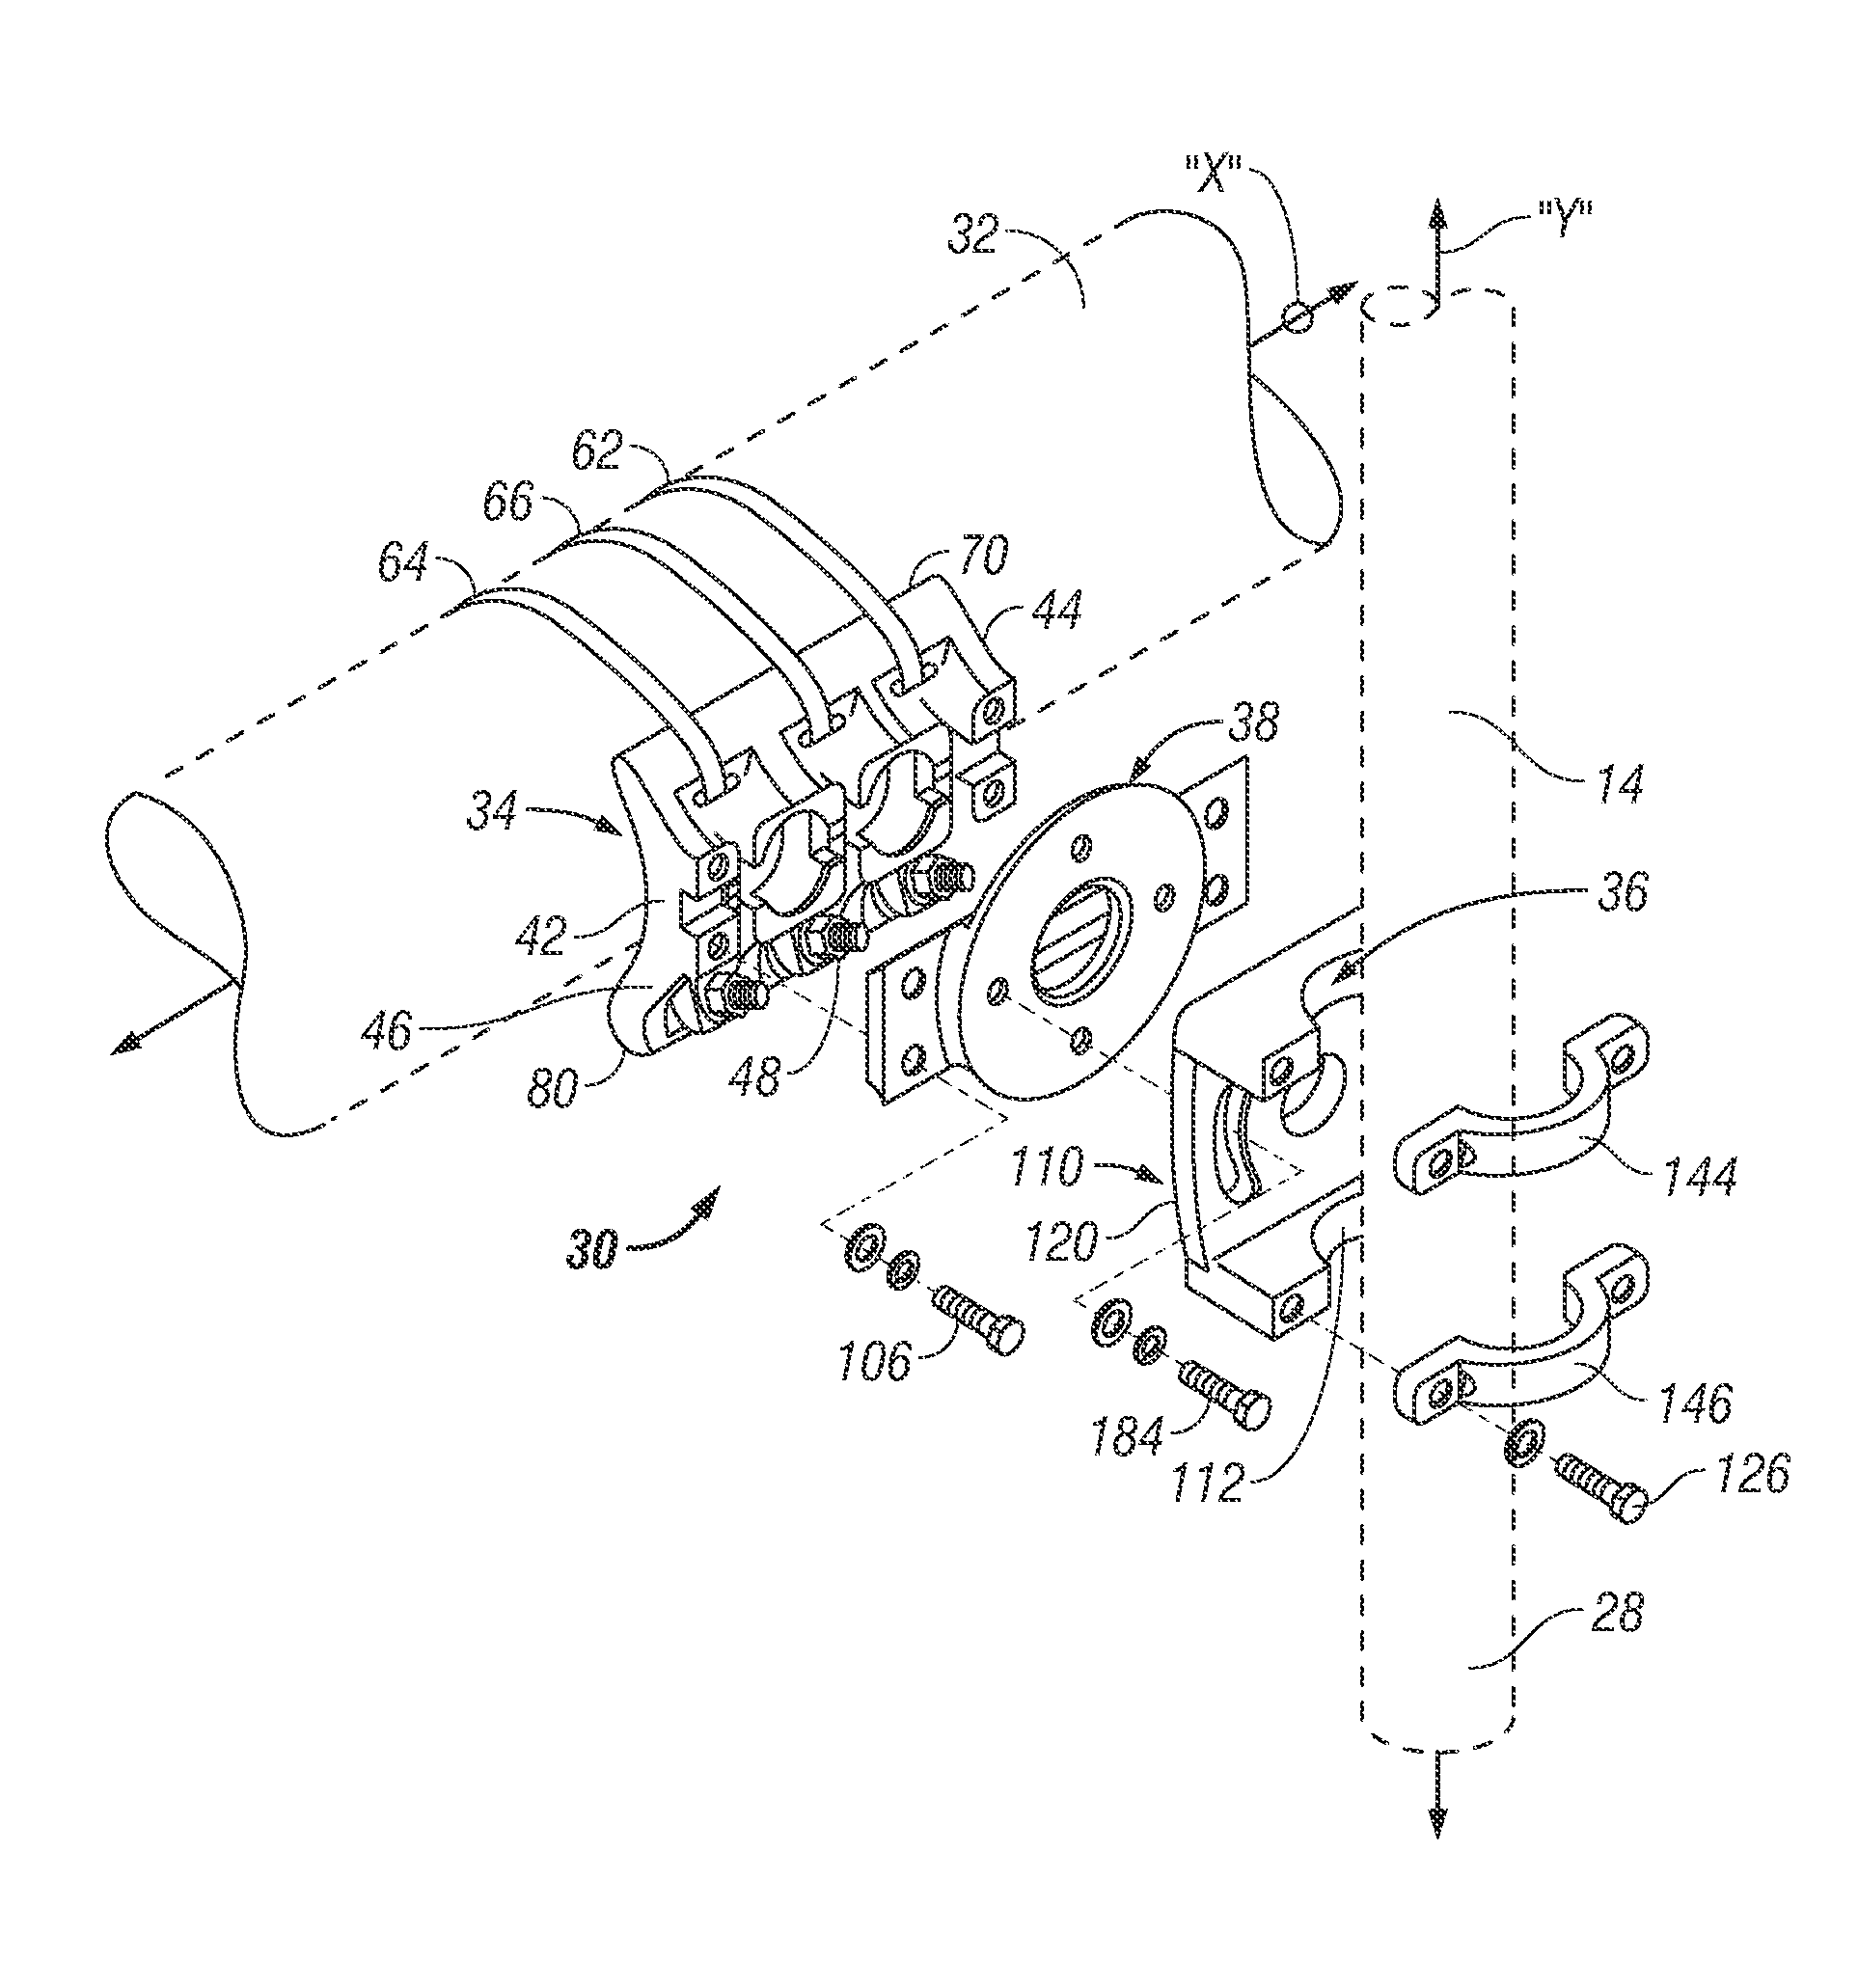 Mounting assembly for traffic cameras and other traffic control devices